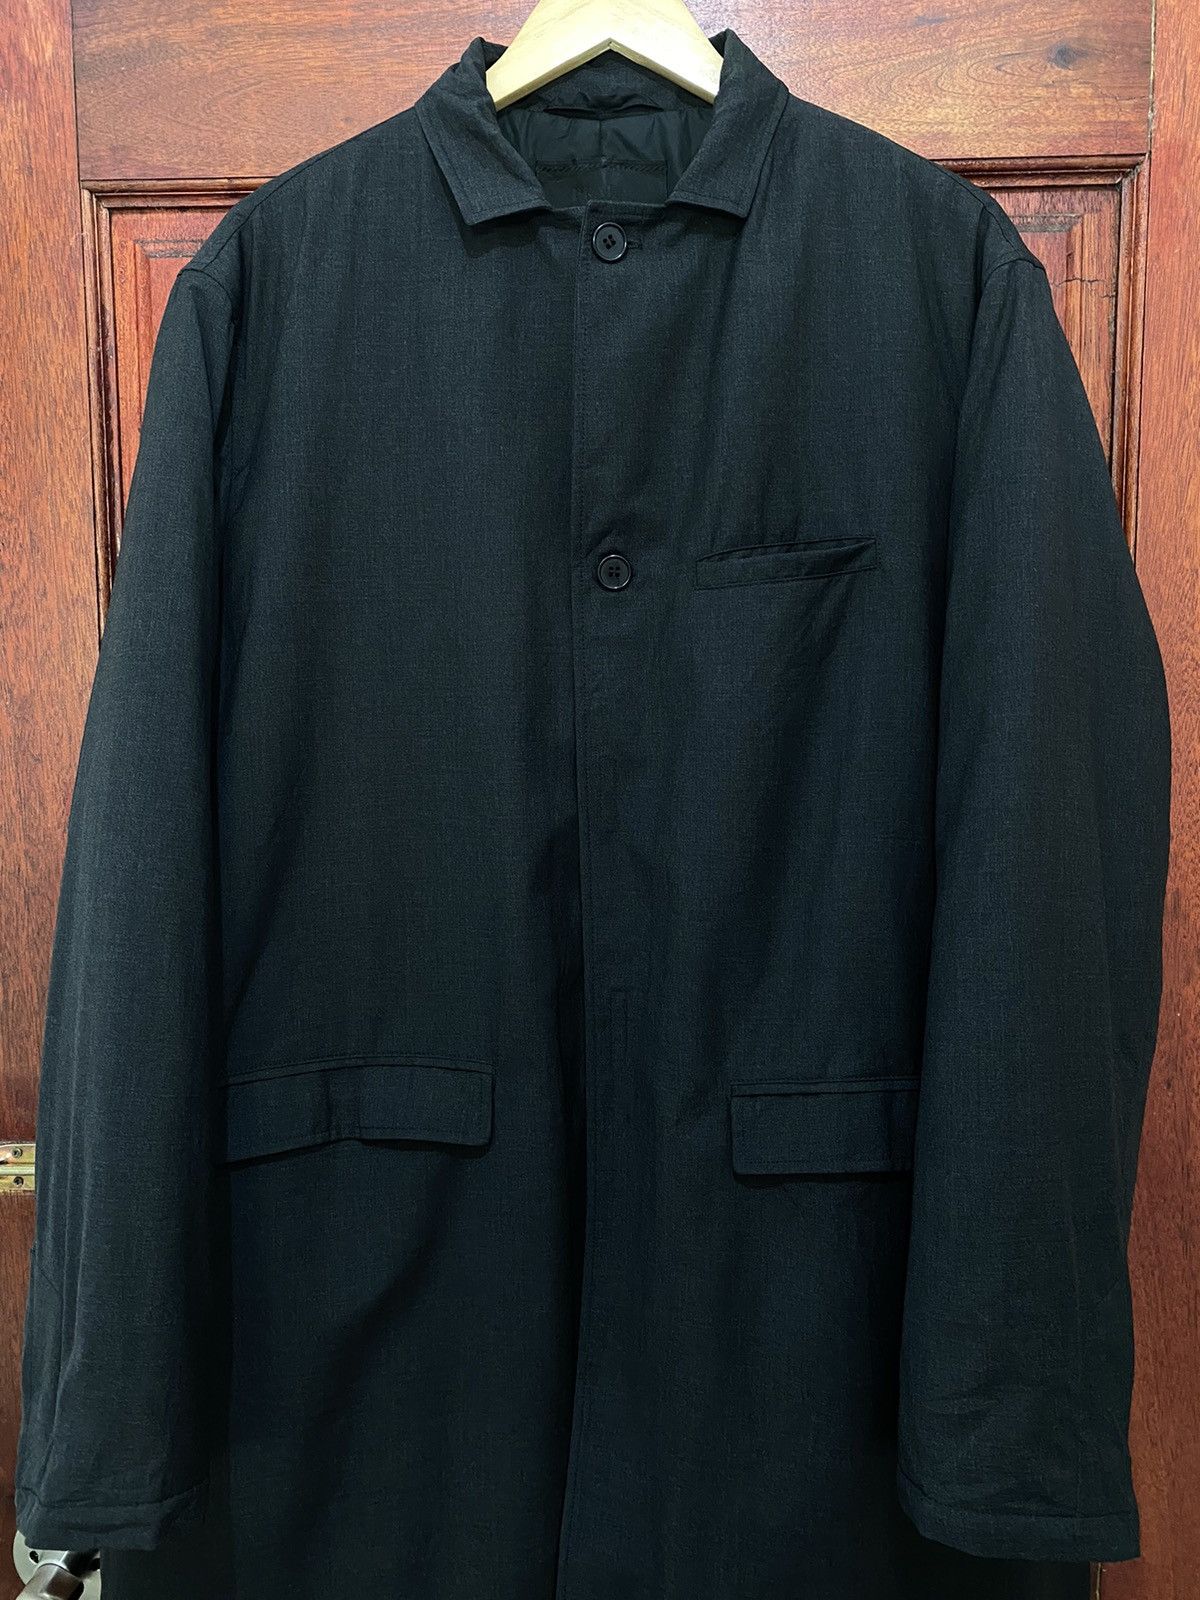 Prada Trench Coat Wool Padded Jacket Perfect Condition - 8